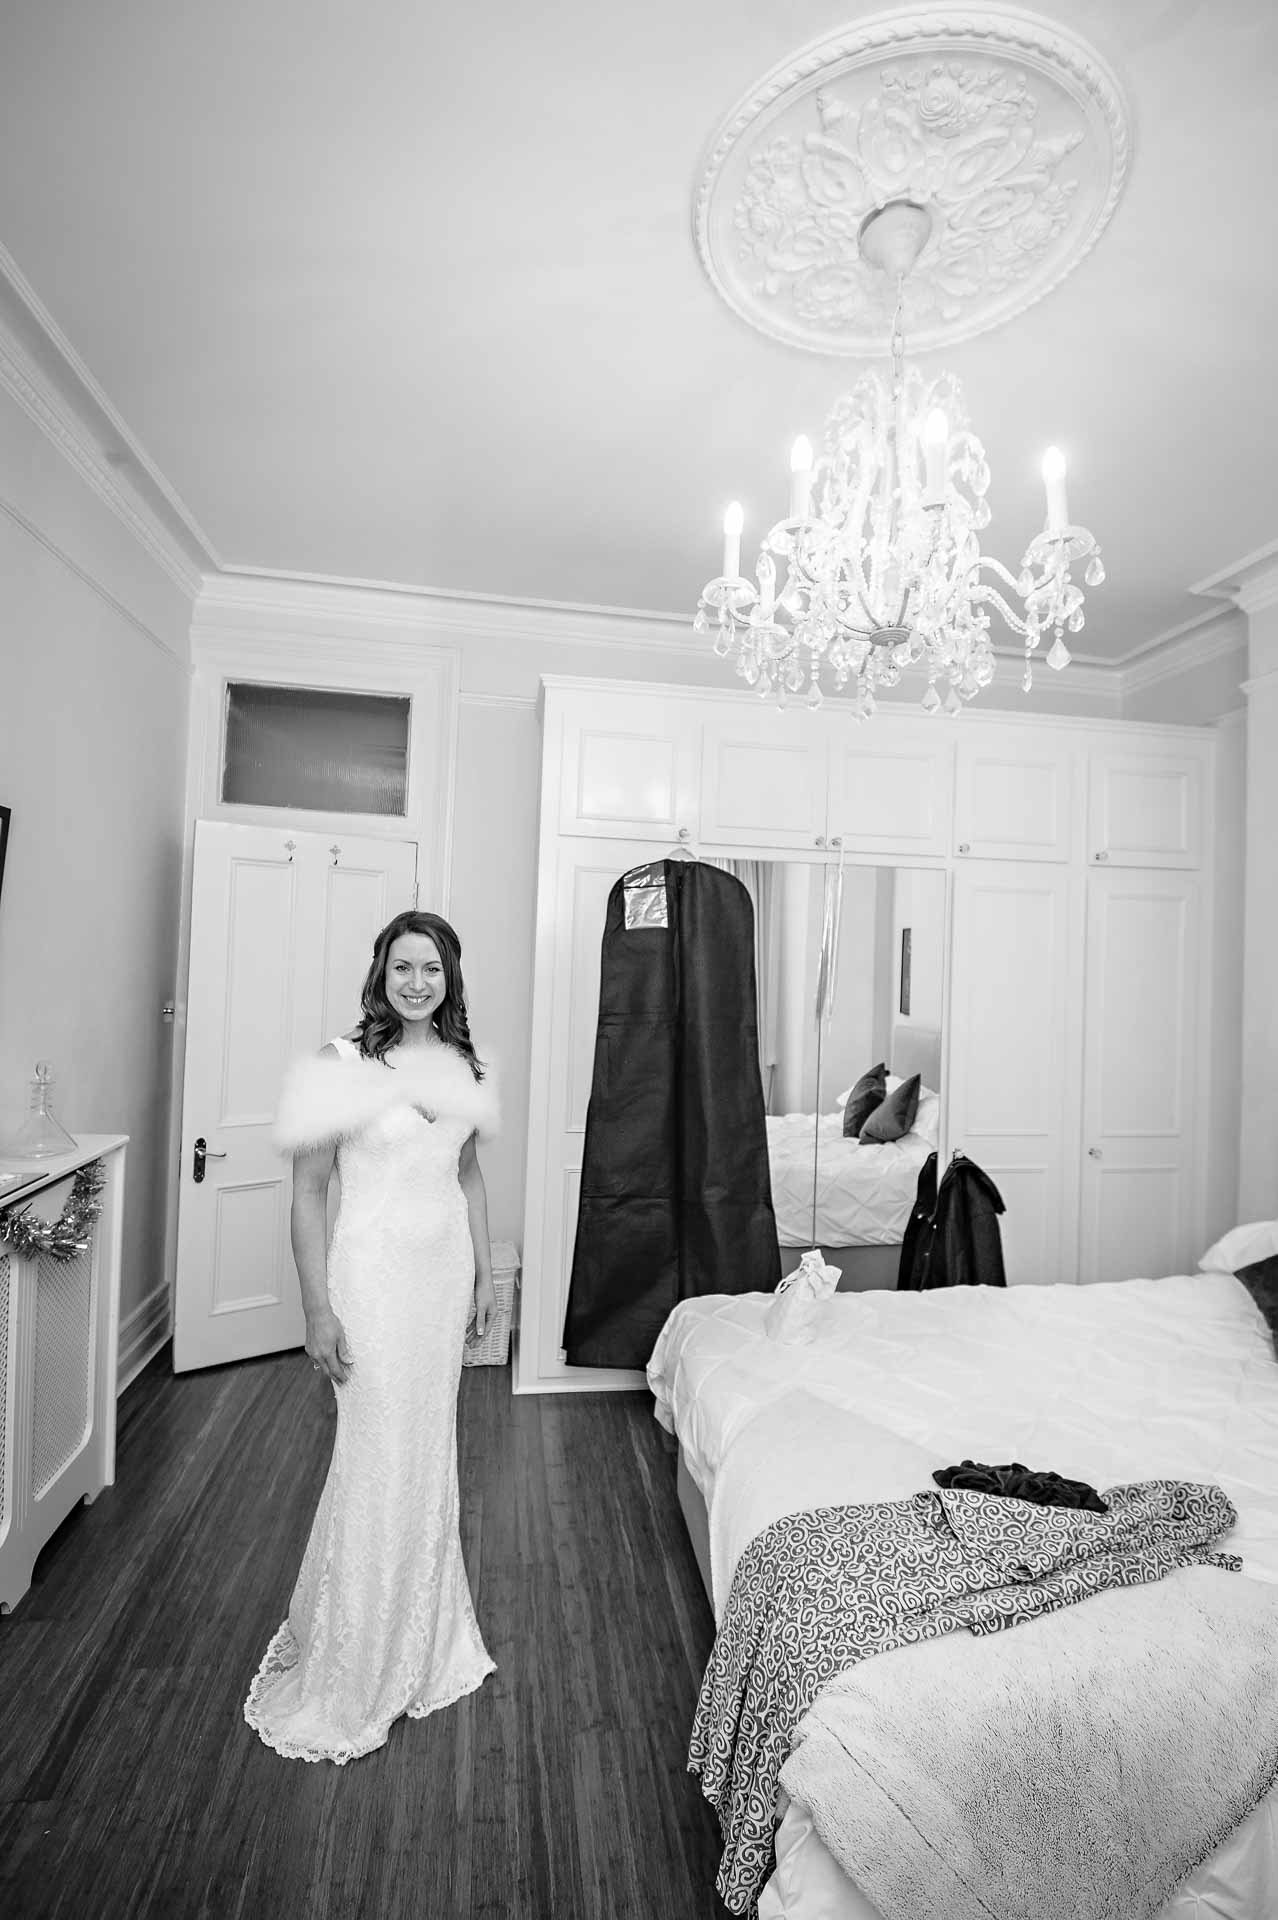 Black and white portrait of bride in room with clothes behind her and on bed